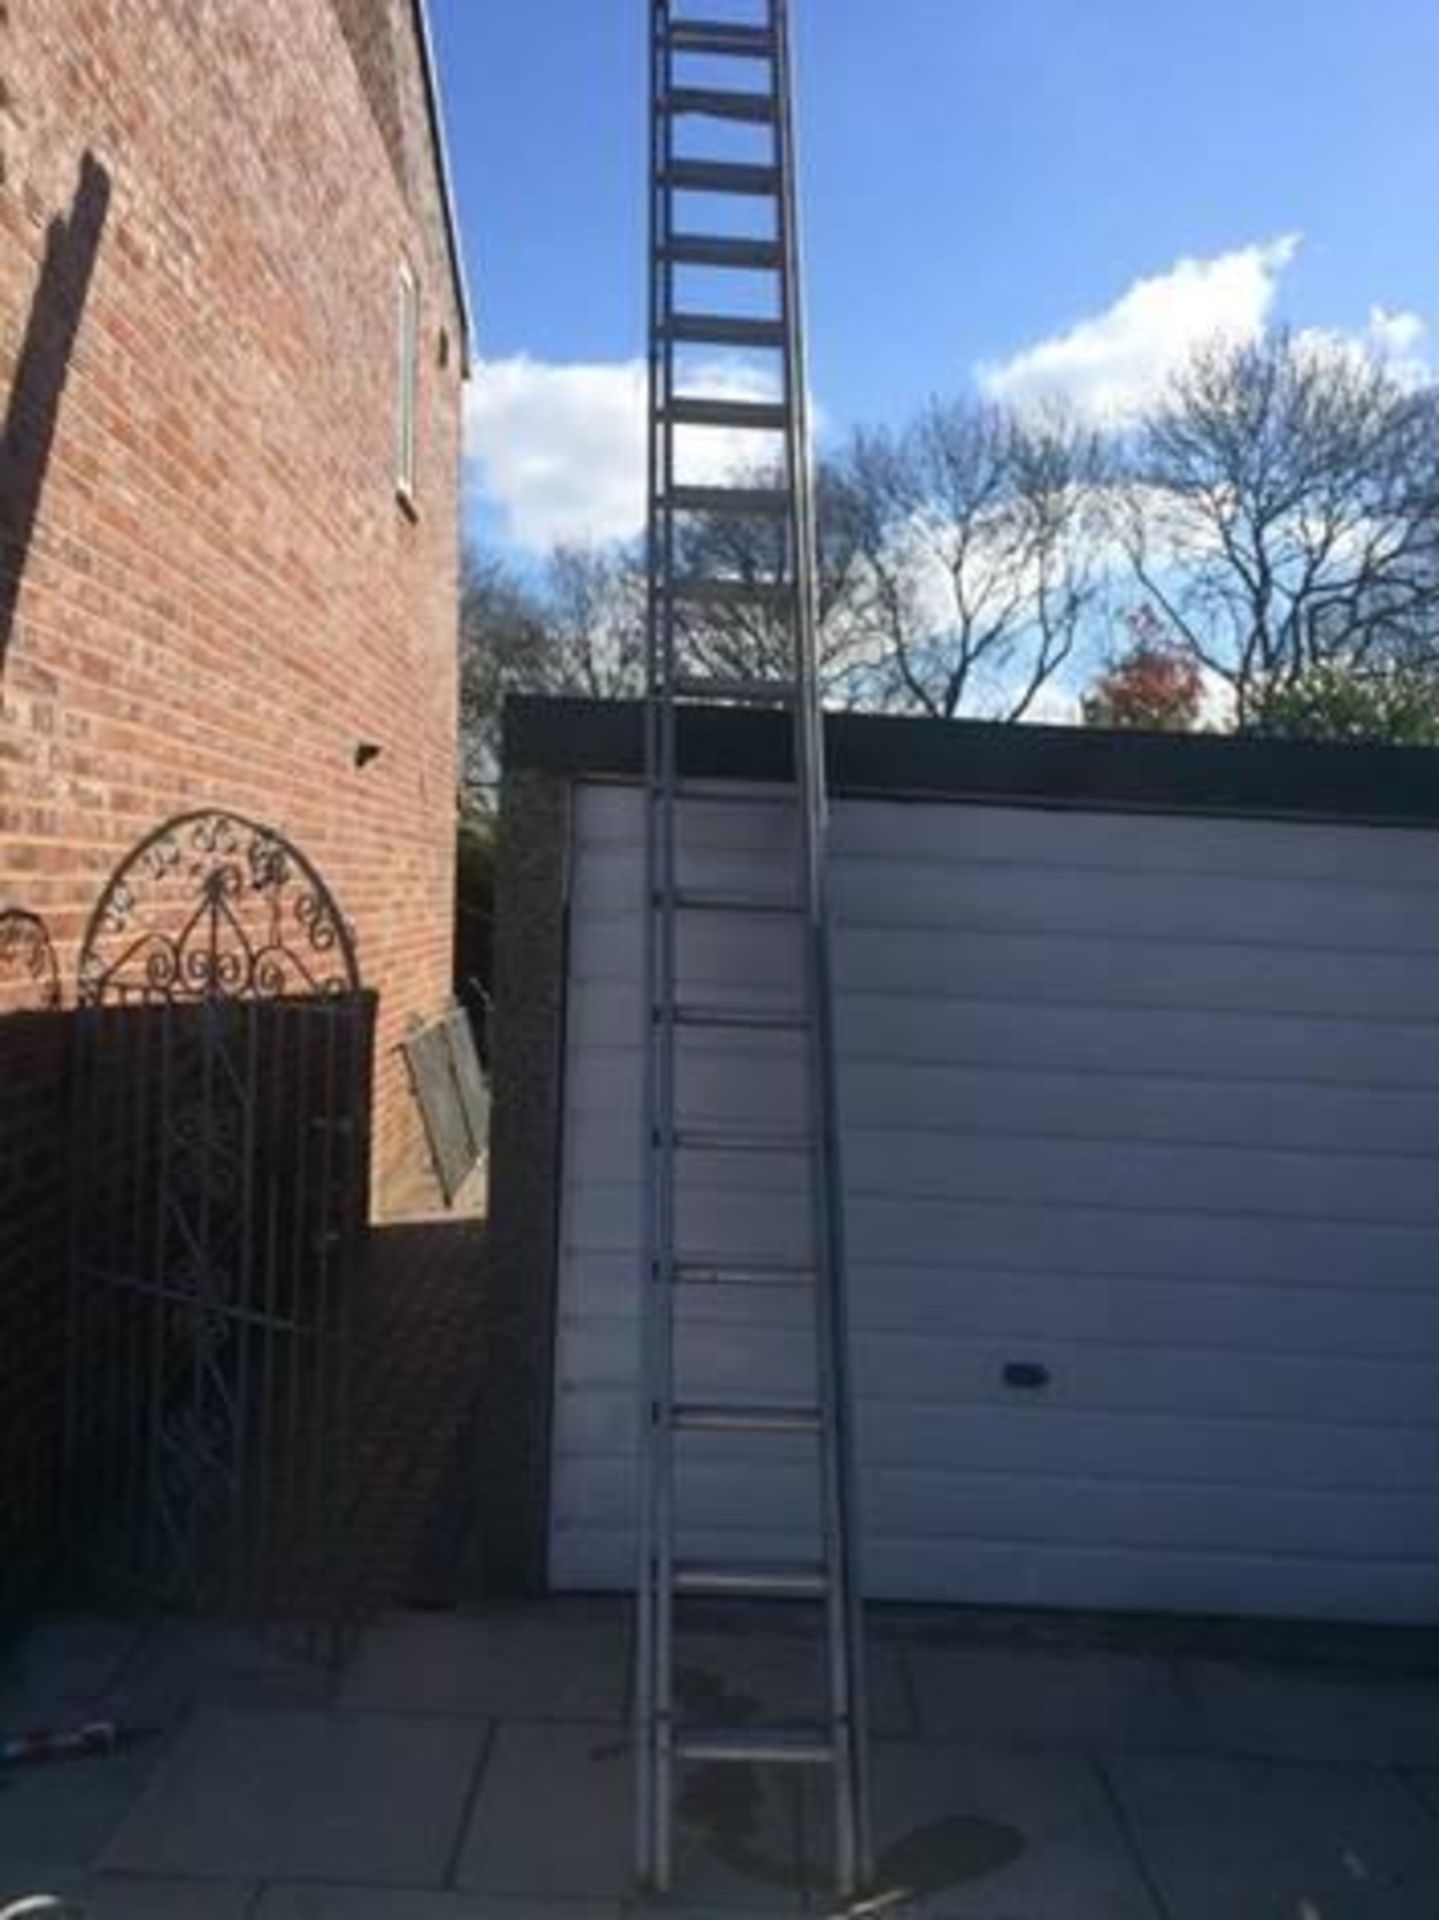 One 16 ft double aluminium extension ladder (with 32 ft span)